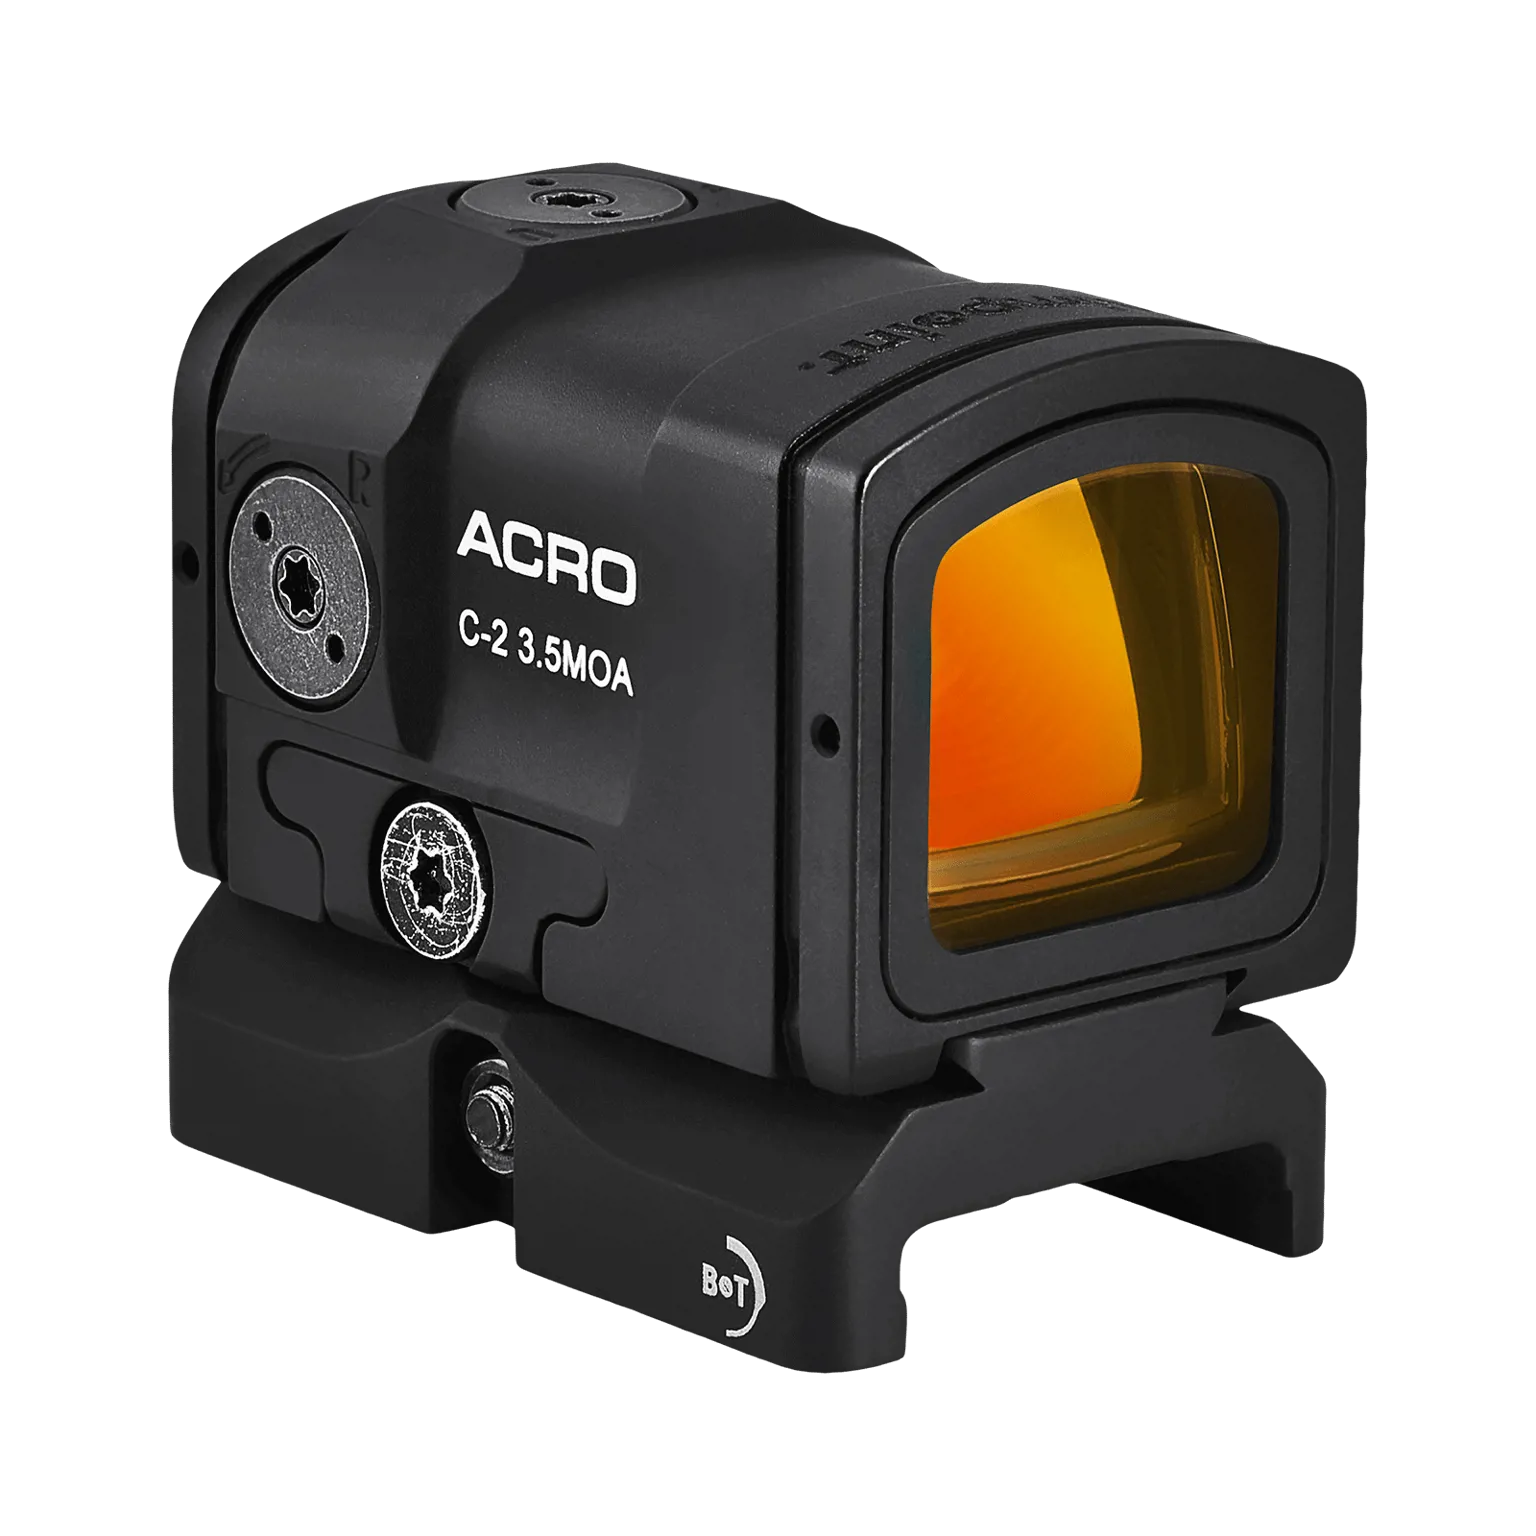 Acro C-2™ 3.5 MOA - Red dot reflex sight with fixed mount 22 mm (without lens covers) - 3